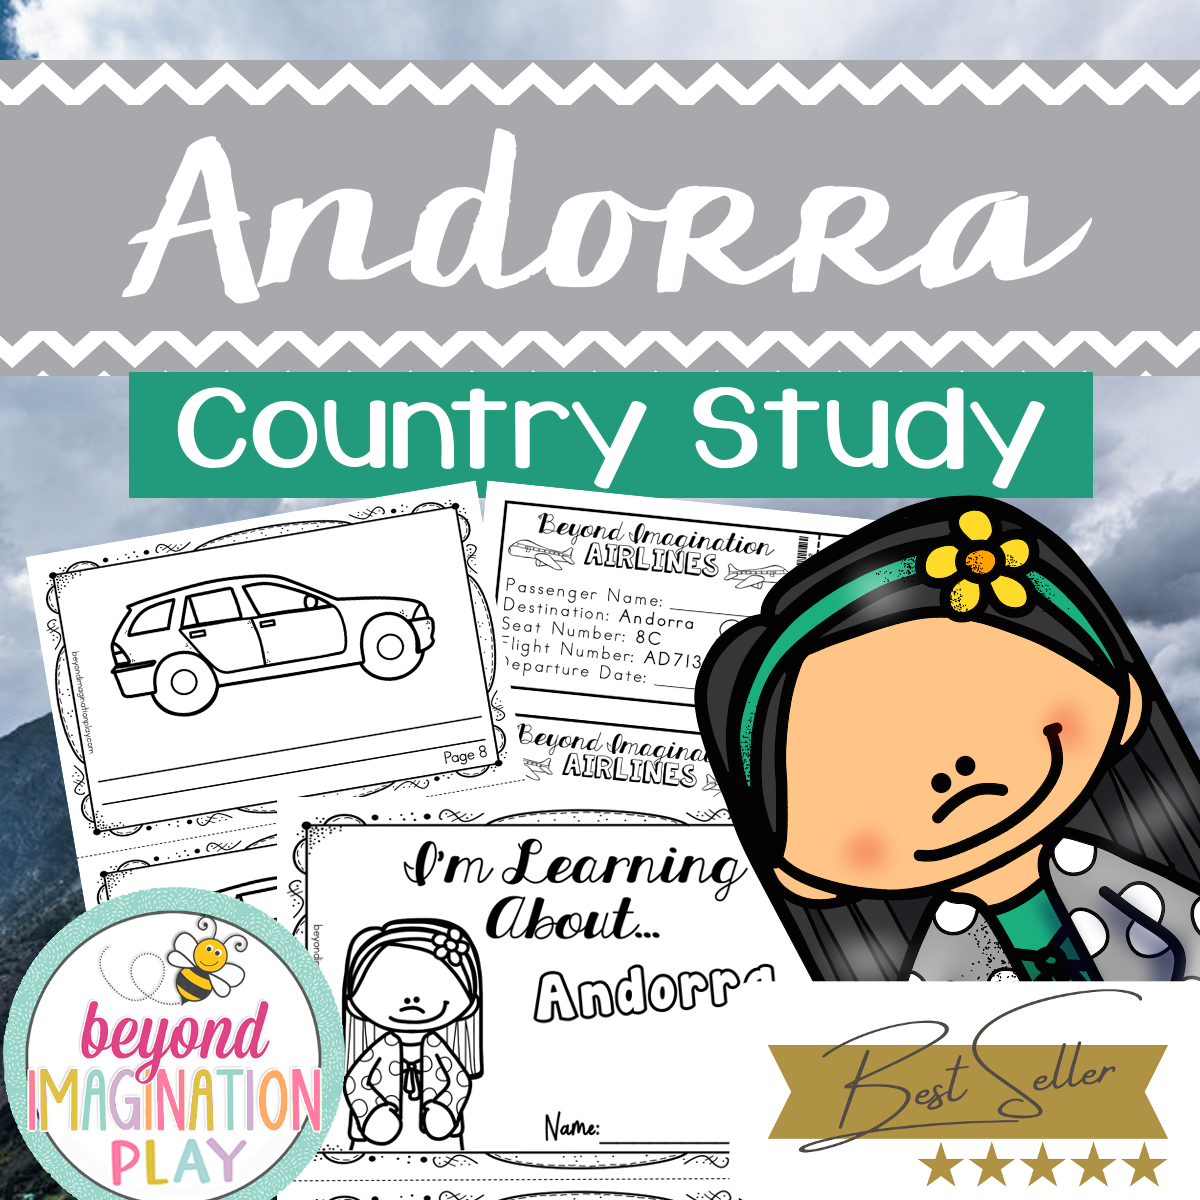 Andorra Country Study (Deluxe Edition)